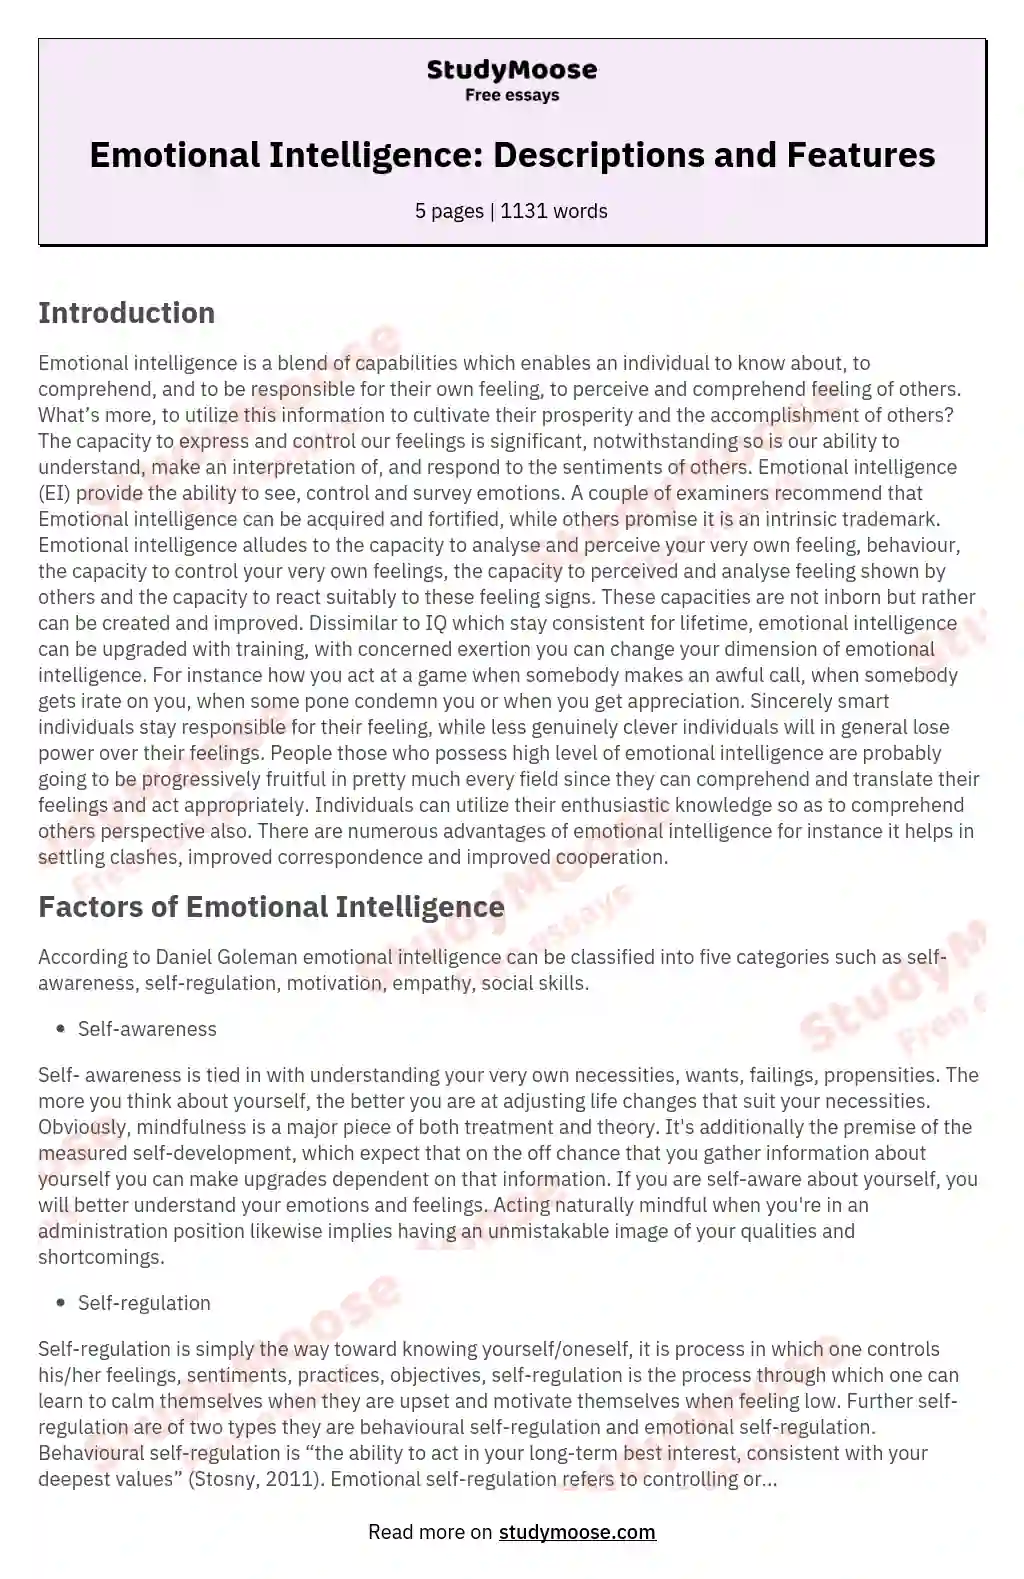 Emotional Intelligence: Descriptions and Features essay